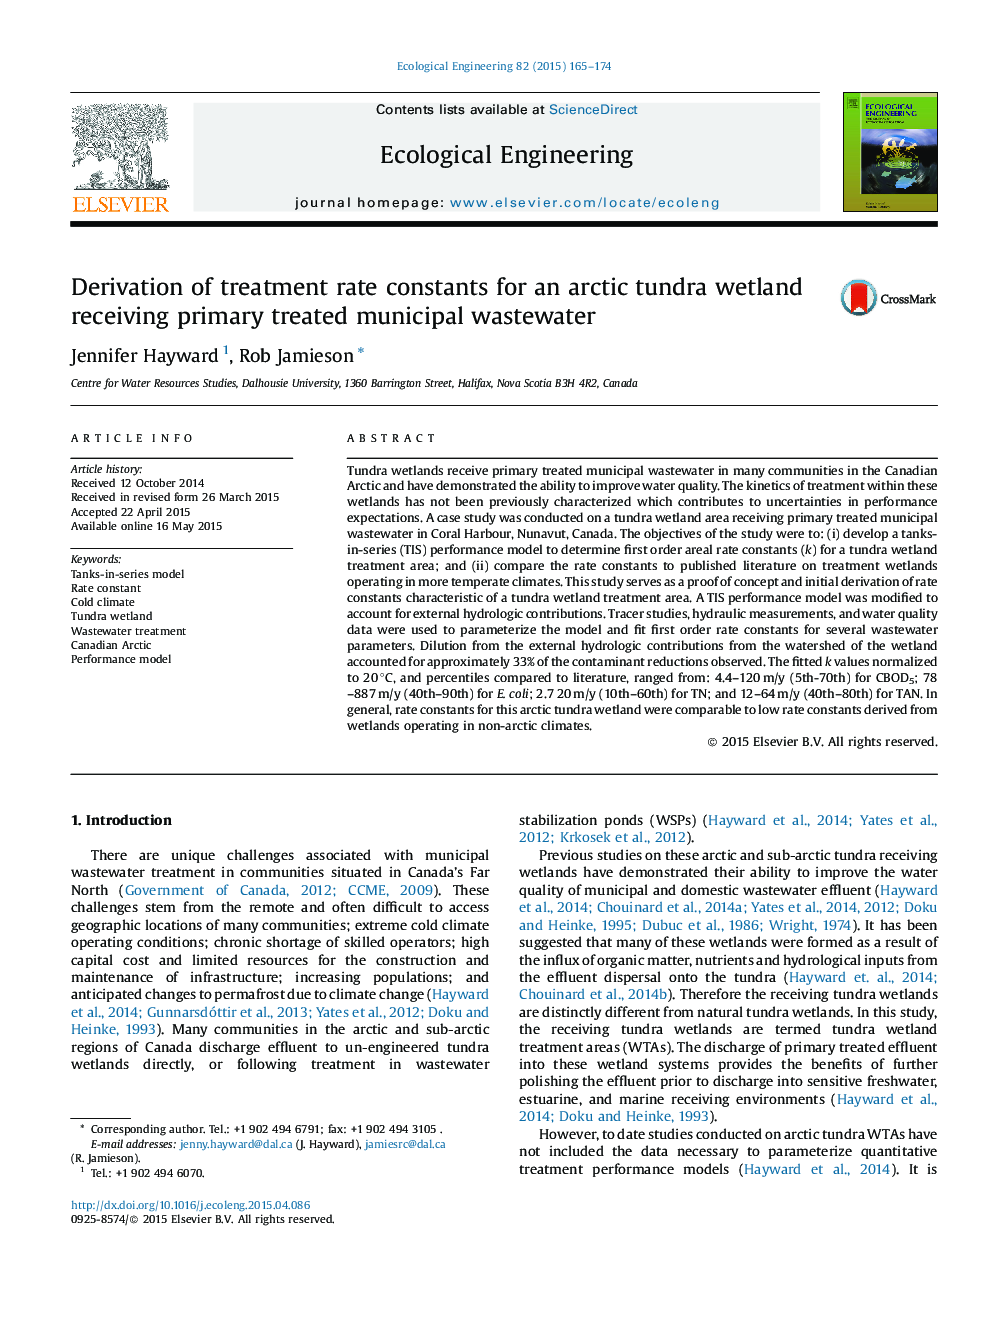 Derivation of treatment rate constants for an arctic tundra wetland receiving primary treated municipal wastewater